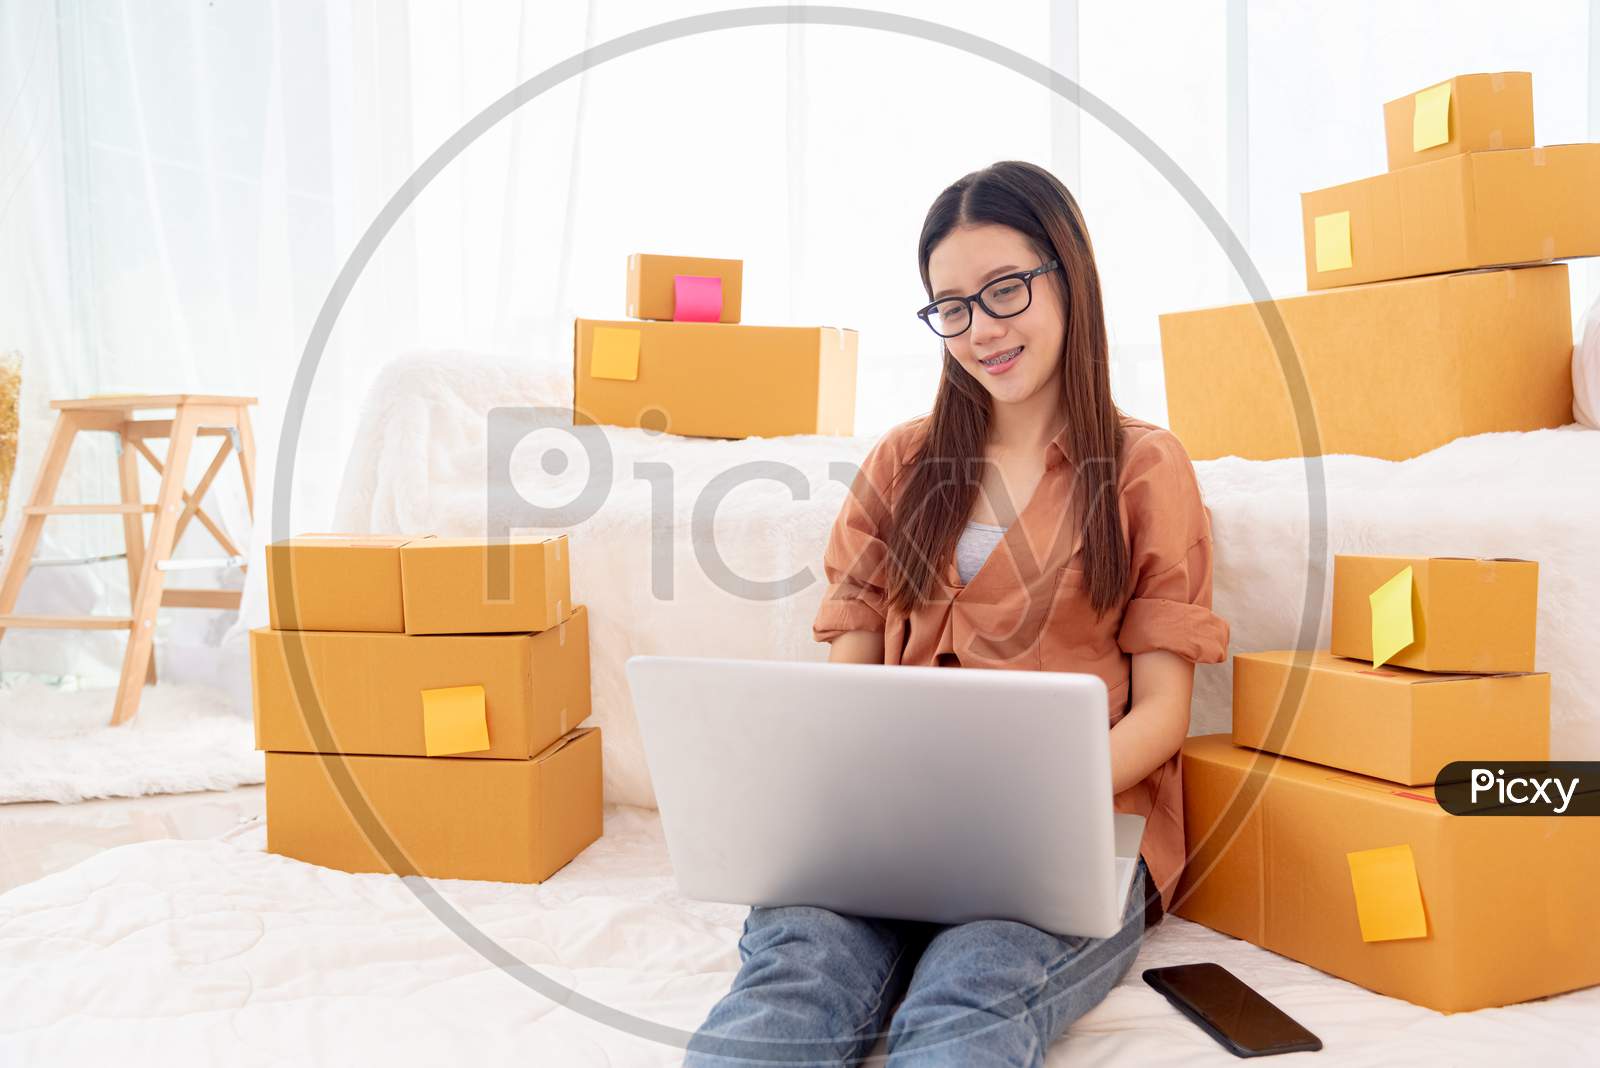 Beauty Asian Woman Using Laptop For Customer Support In Bedroom. Business And Technology Concept. Delivery And Online Shopping Concept. Service Theme. People Lifestyle Remote Work In Domestic House